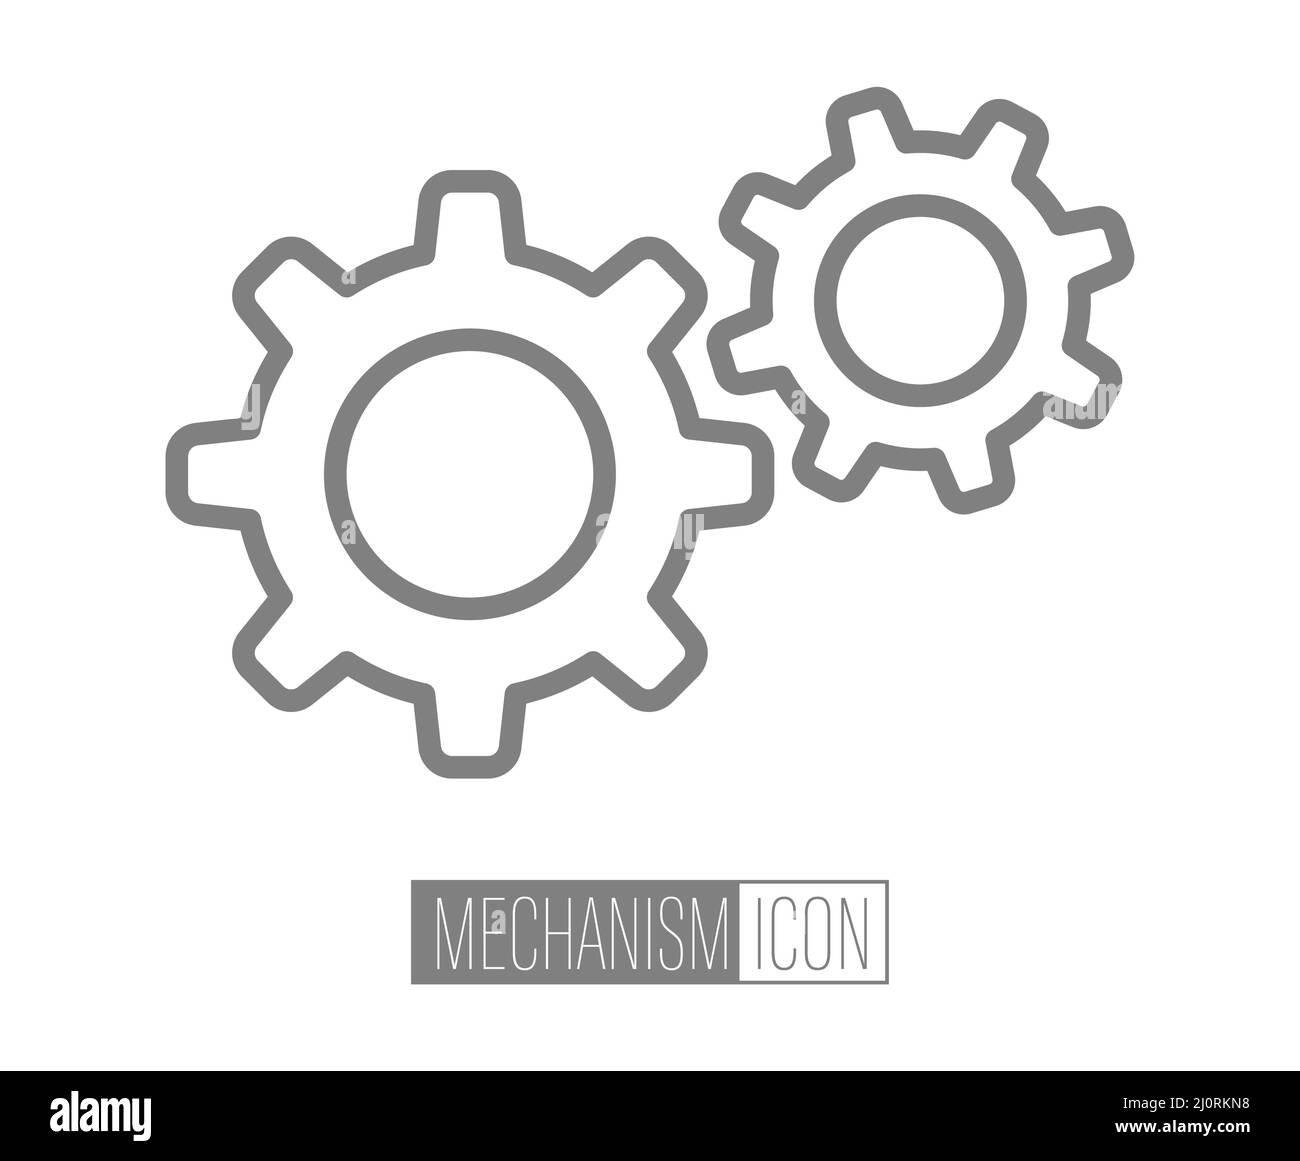 icon of the mechanism. Two gears. Vector illustration for logo, sticker, brand and creative design. Stock Vector